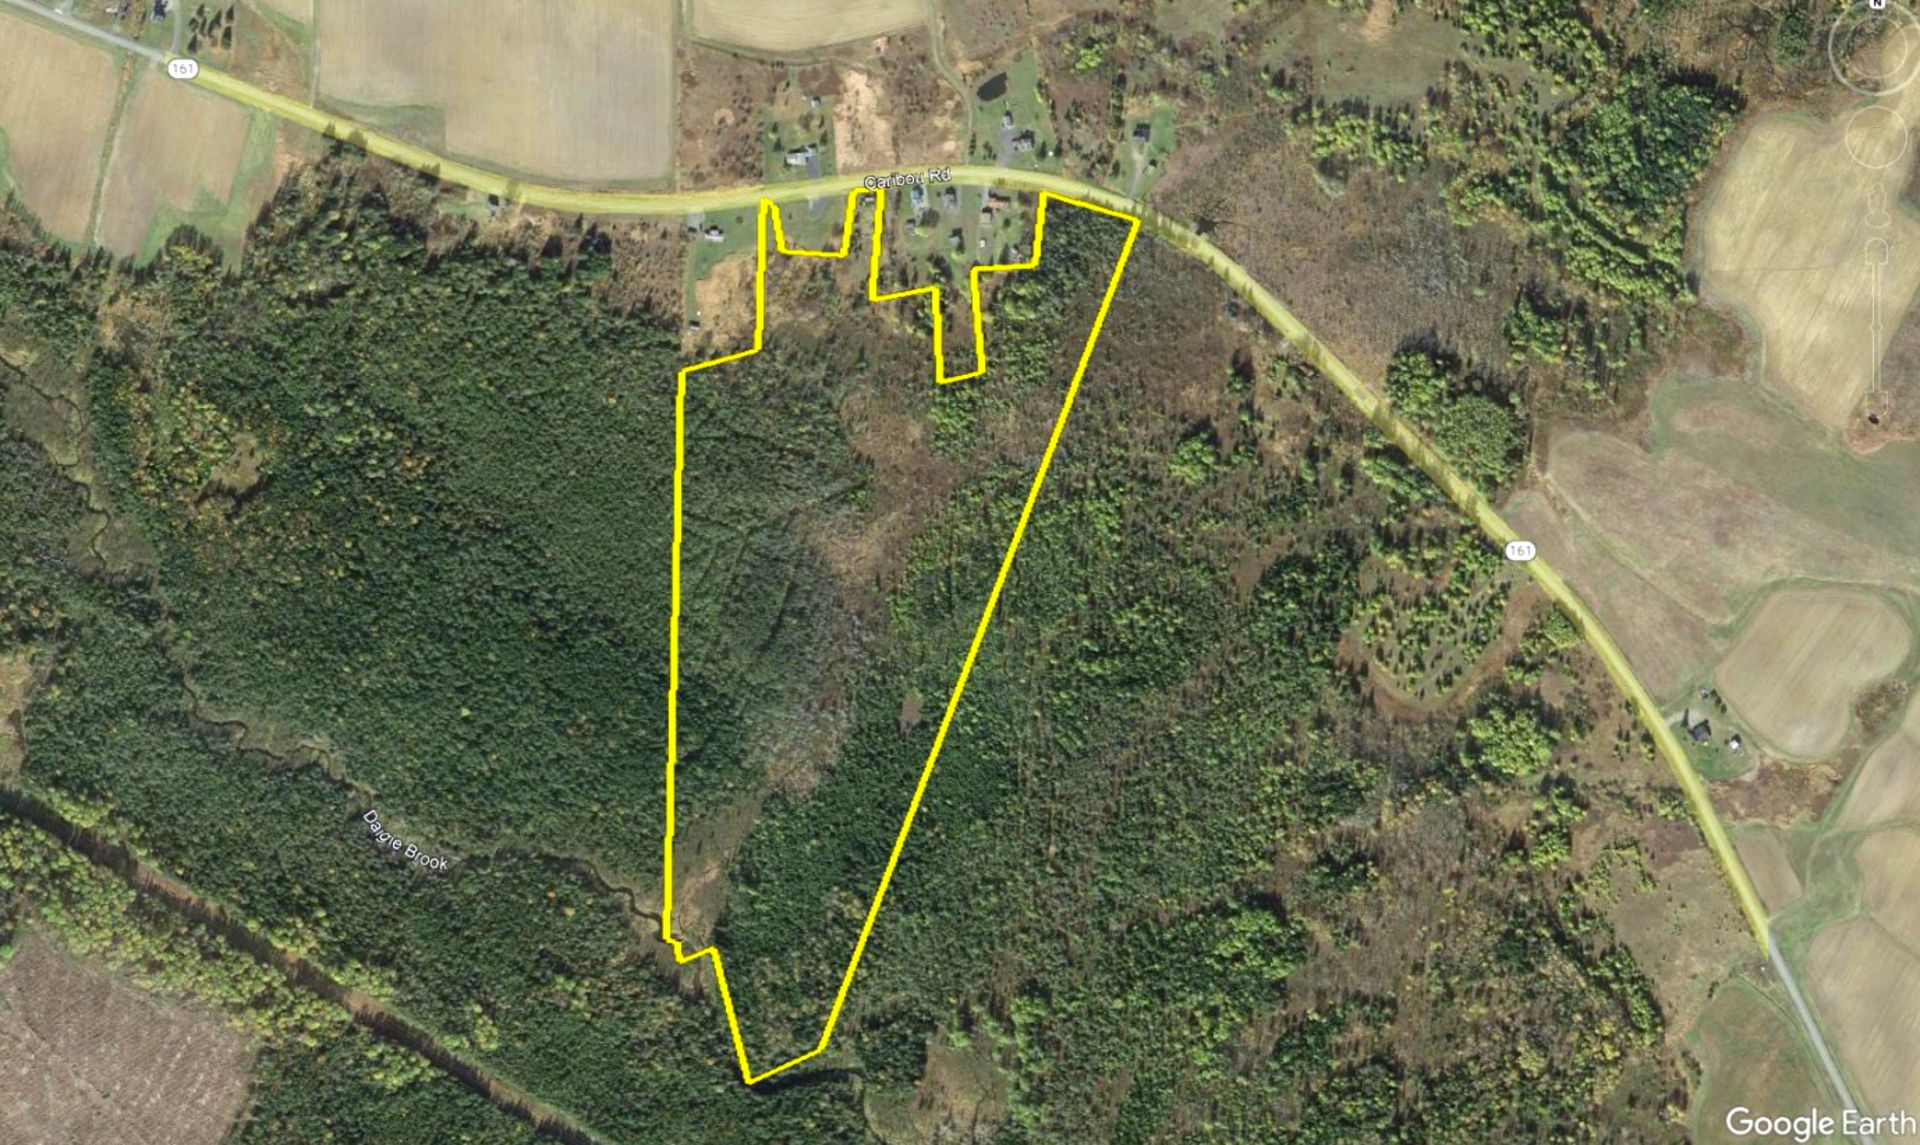 56 Acres on Route 161 in Aroostook County, Maine!